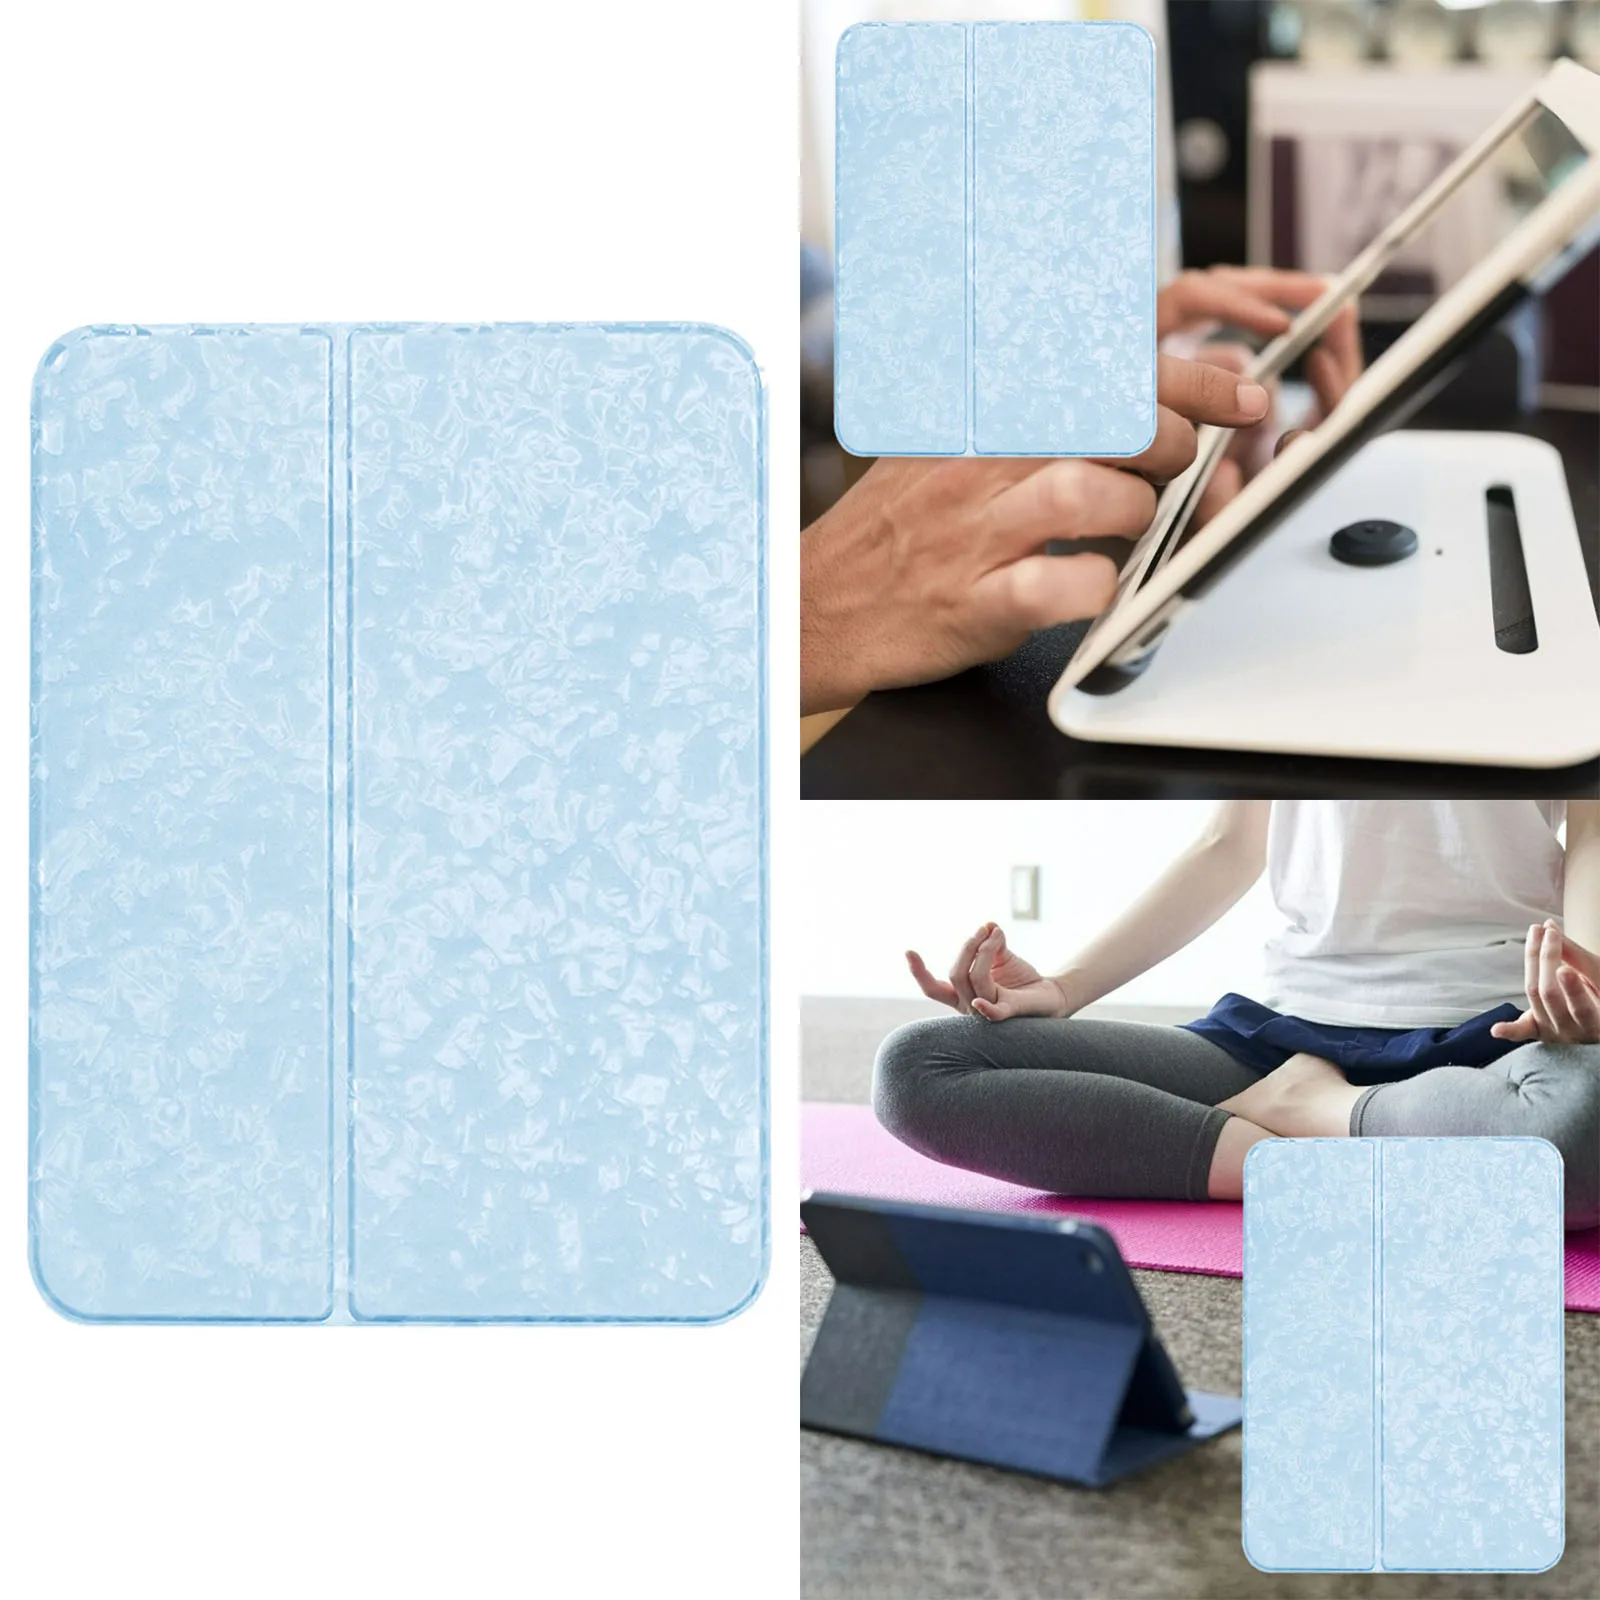 Smart Cover Slim Foldable Kickstand Magnetic Pencil Holder 8.4'' Shell for iPad Mini 6 Case 2021 Screen Protector